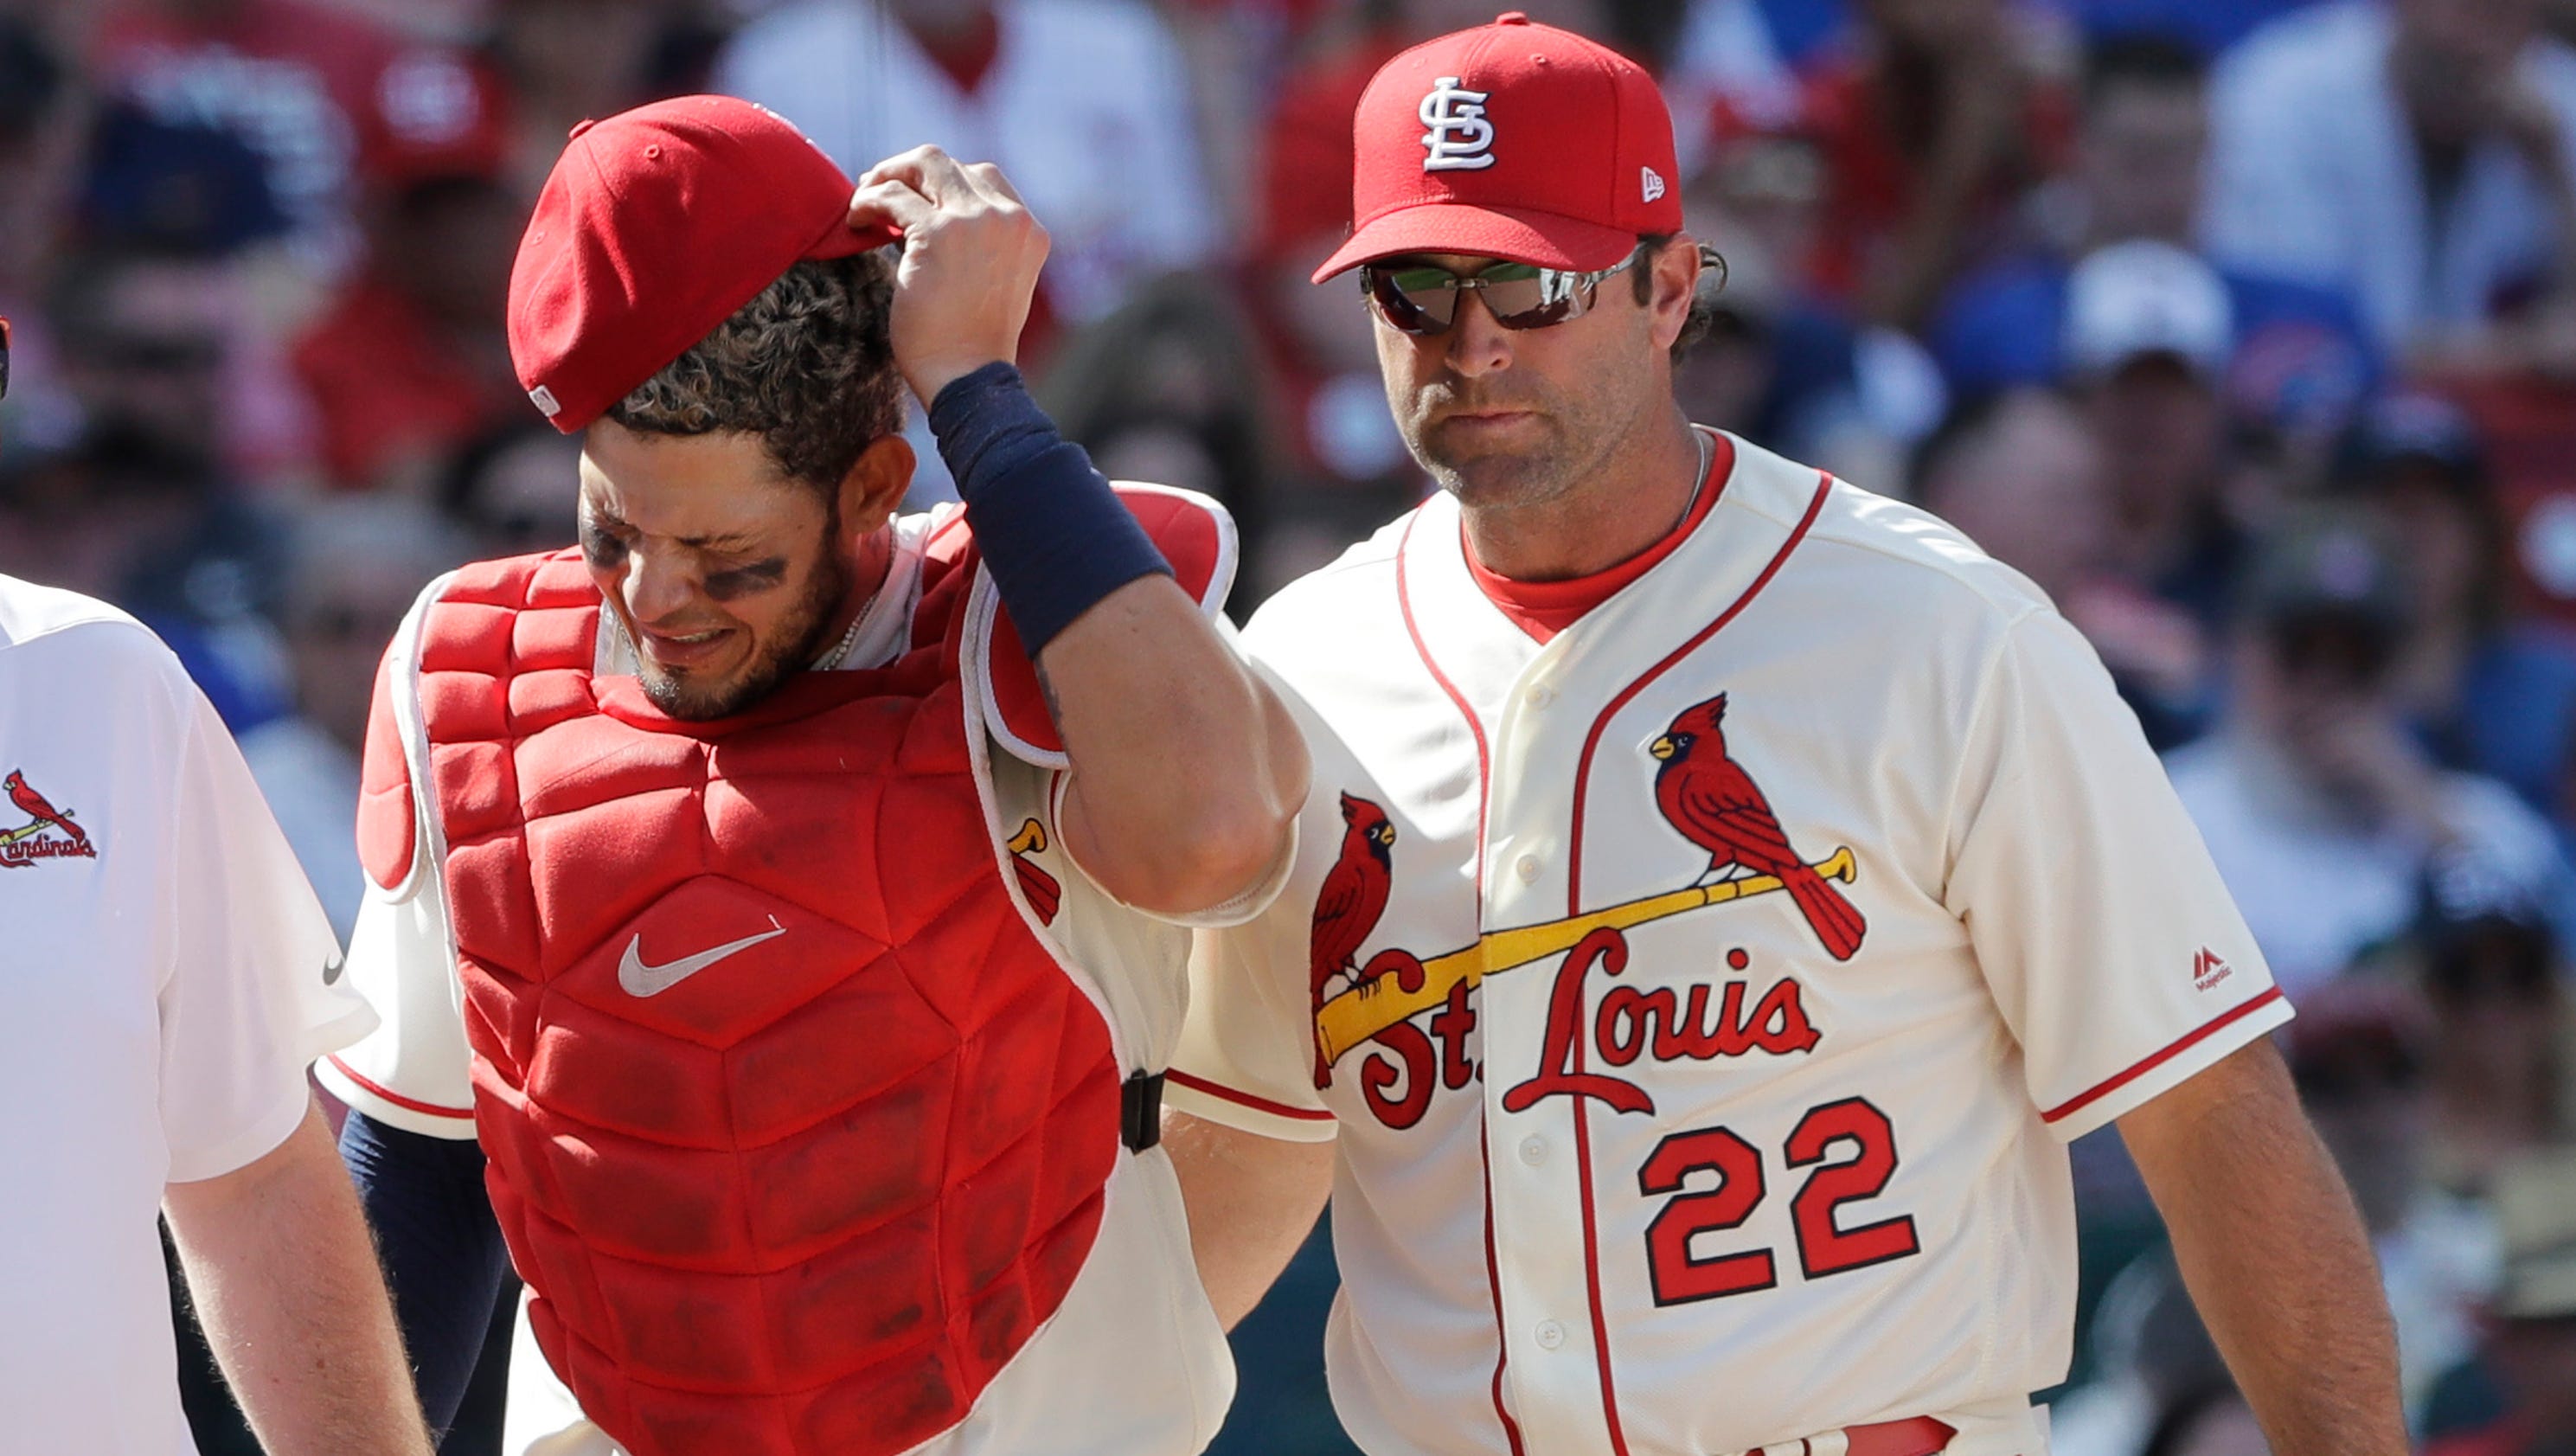 Cardinals' Yadier Molina, injured on foul tip to groin, returns home after surgery